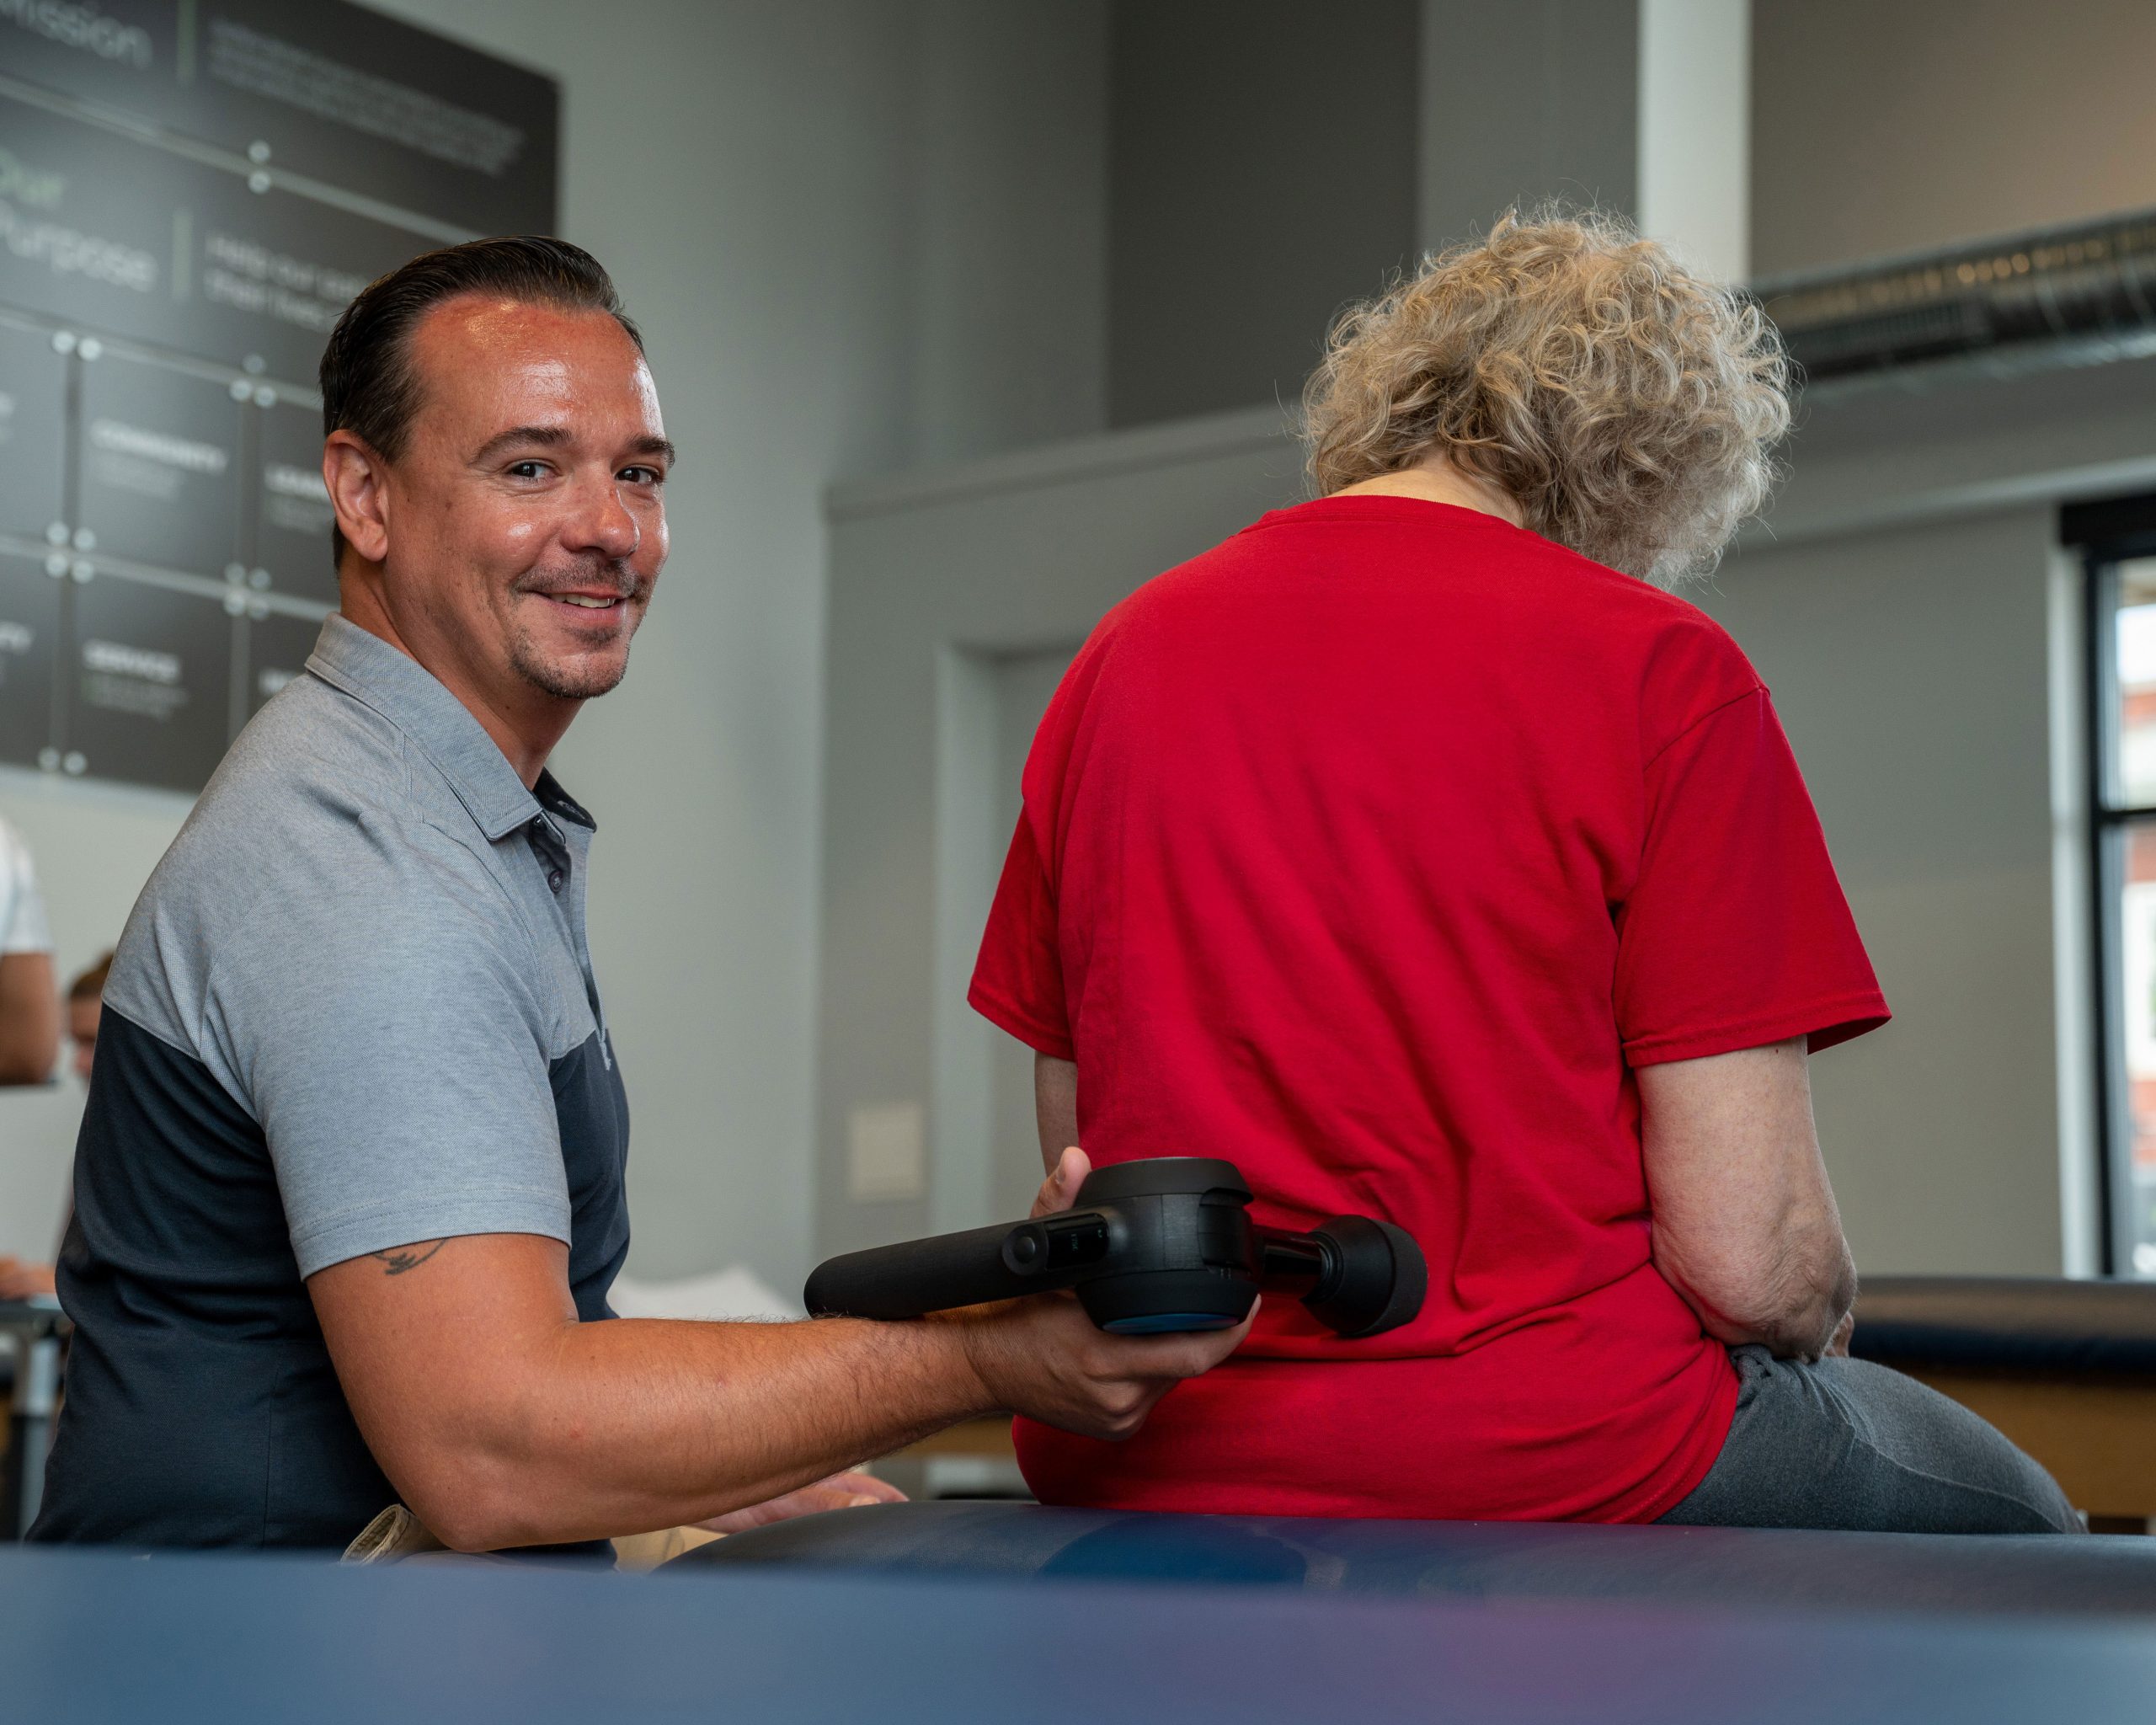 A Physical Therapist smiles at the camera as he uses a massage gun on his patient.